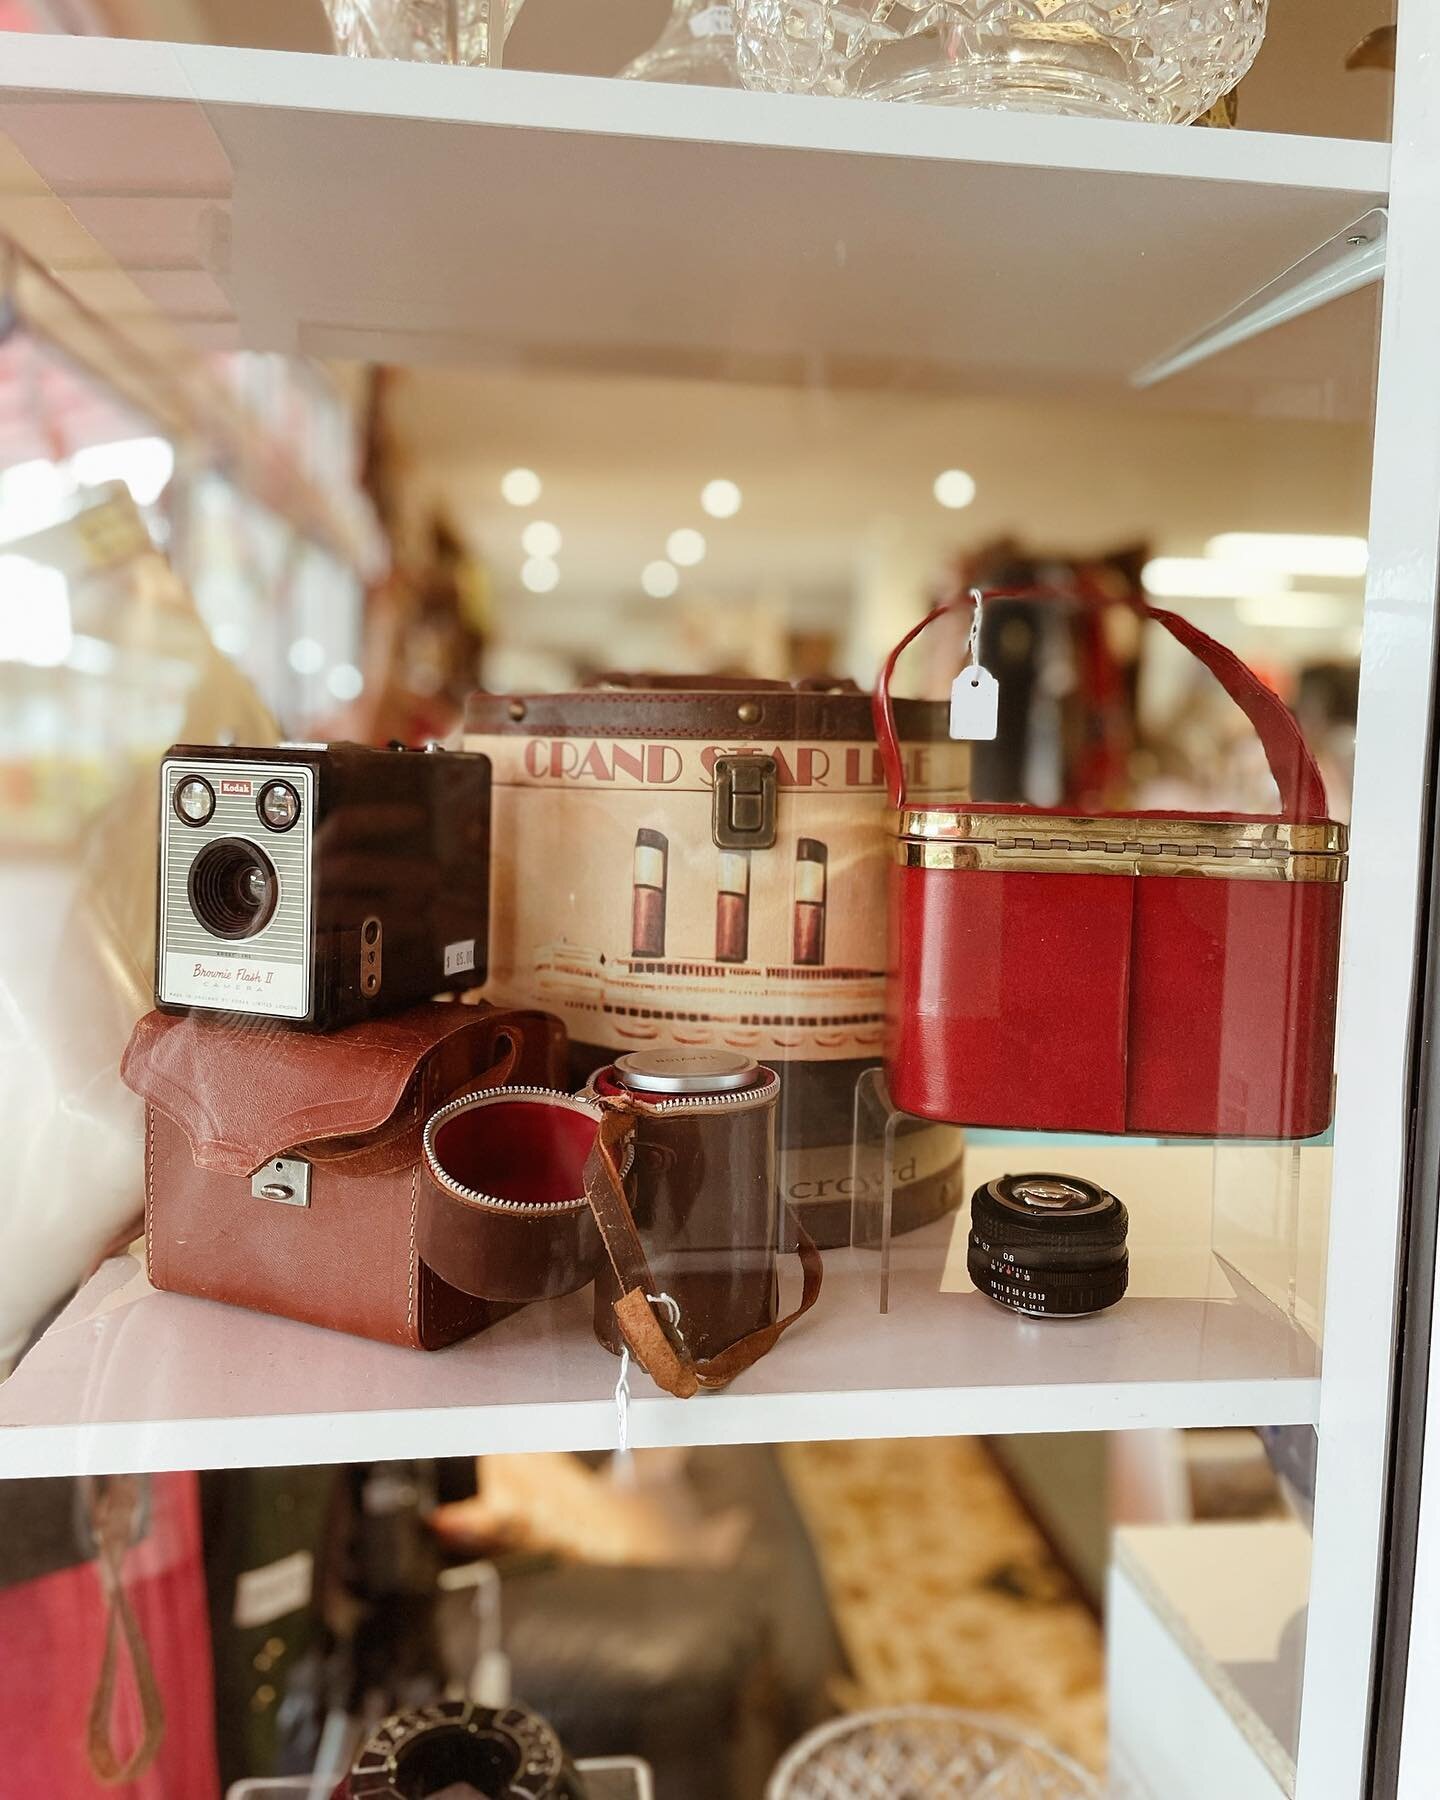 There&rsquo;s nothing like an assortment of vintage cases &amp; cameras to catch your eye! (At least for us anyway 😉) 

You can find these beauties in our window display tomorrow, we&rsquo;ll be open from 9am - 4pm&hellip; see you then x